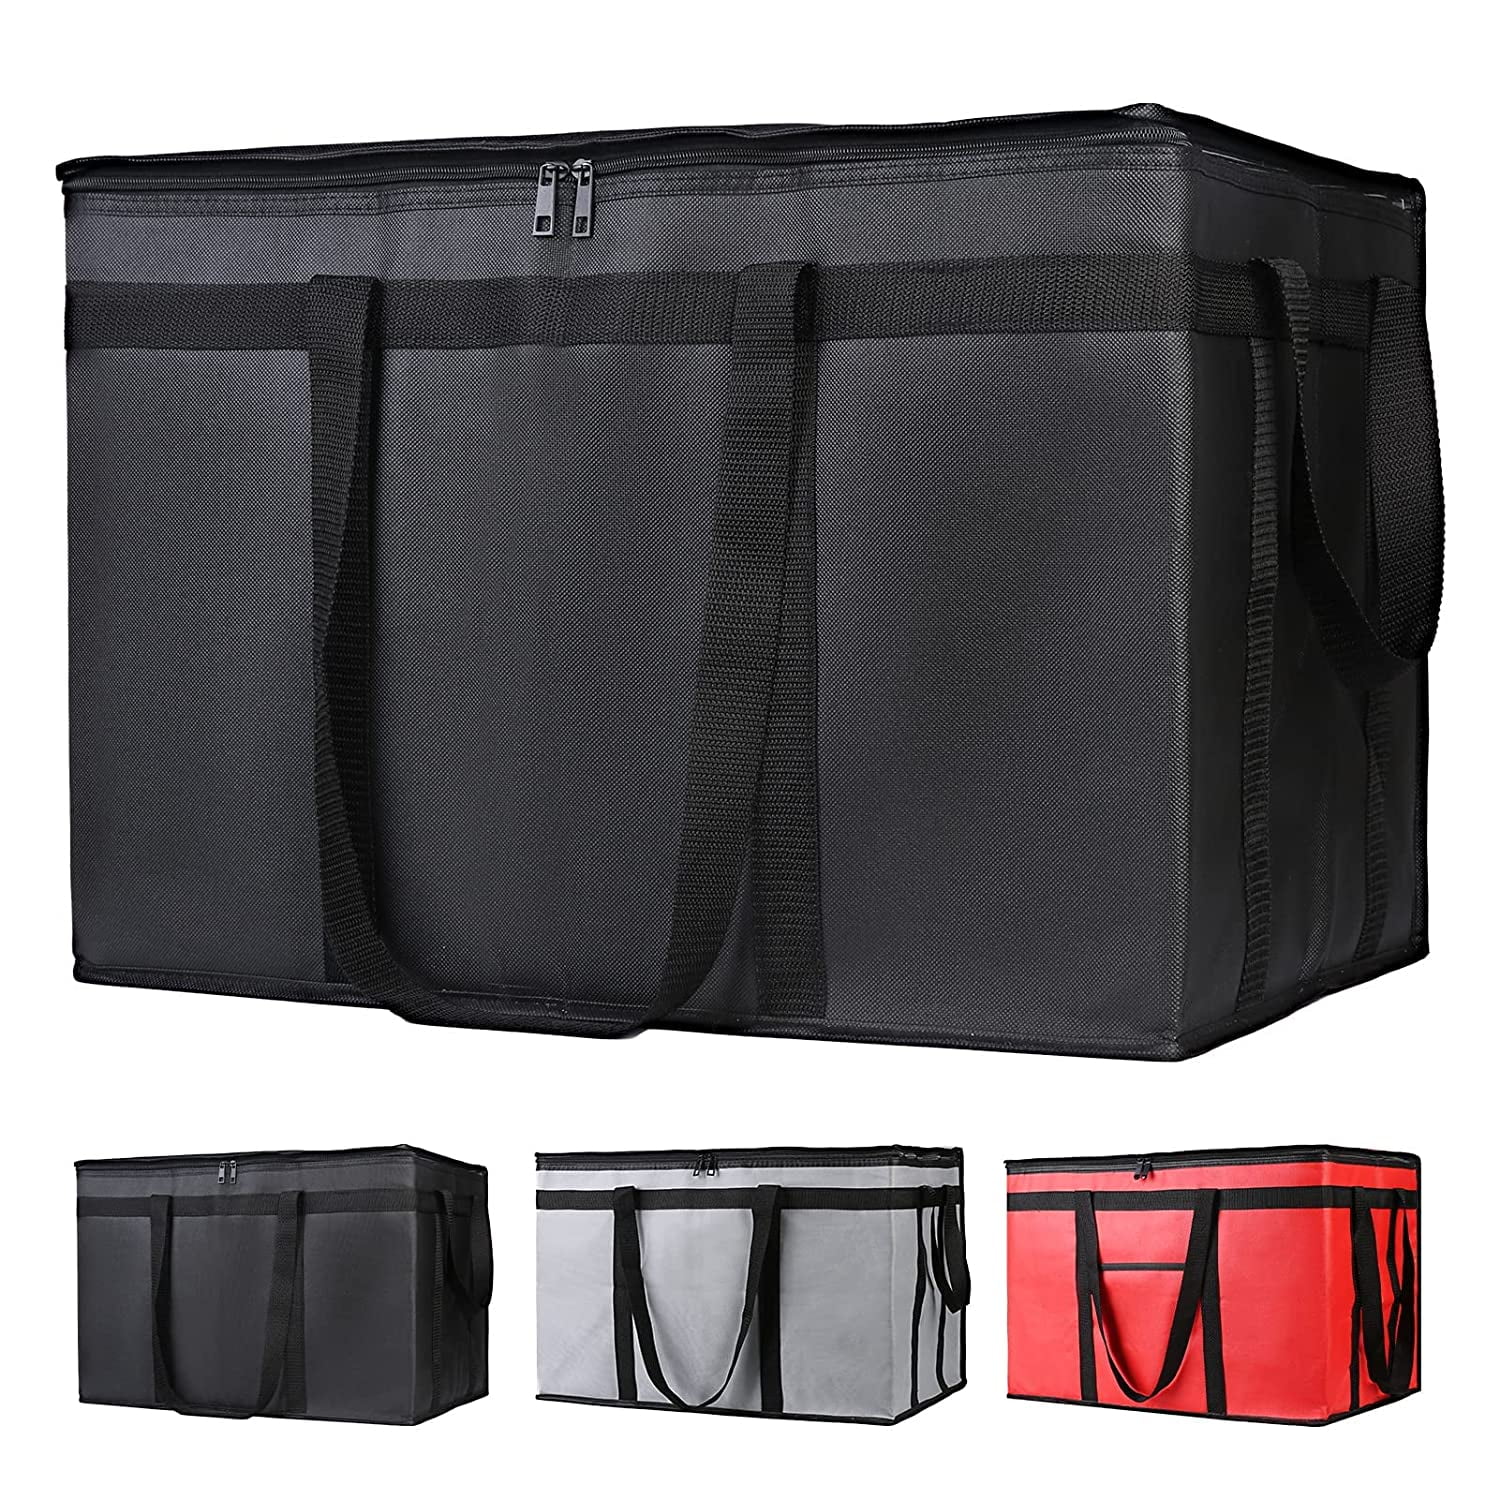 Insulated Food Delivery Bag, XXX-Large Insulated Reusable Grocery Cooler/Hot  Bags, Tote Bag for Shopping/Travel/Doordash, Black, 1-Pack